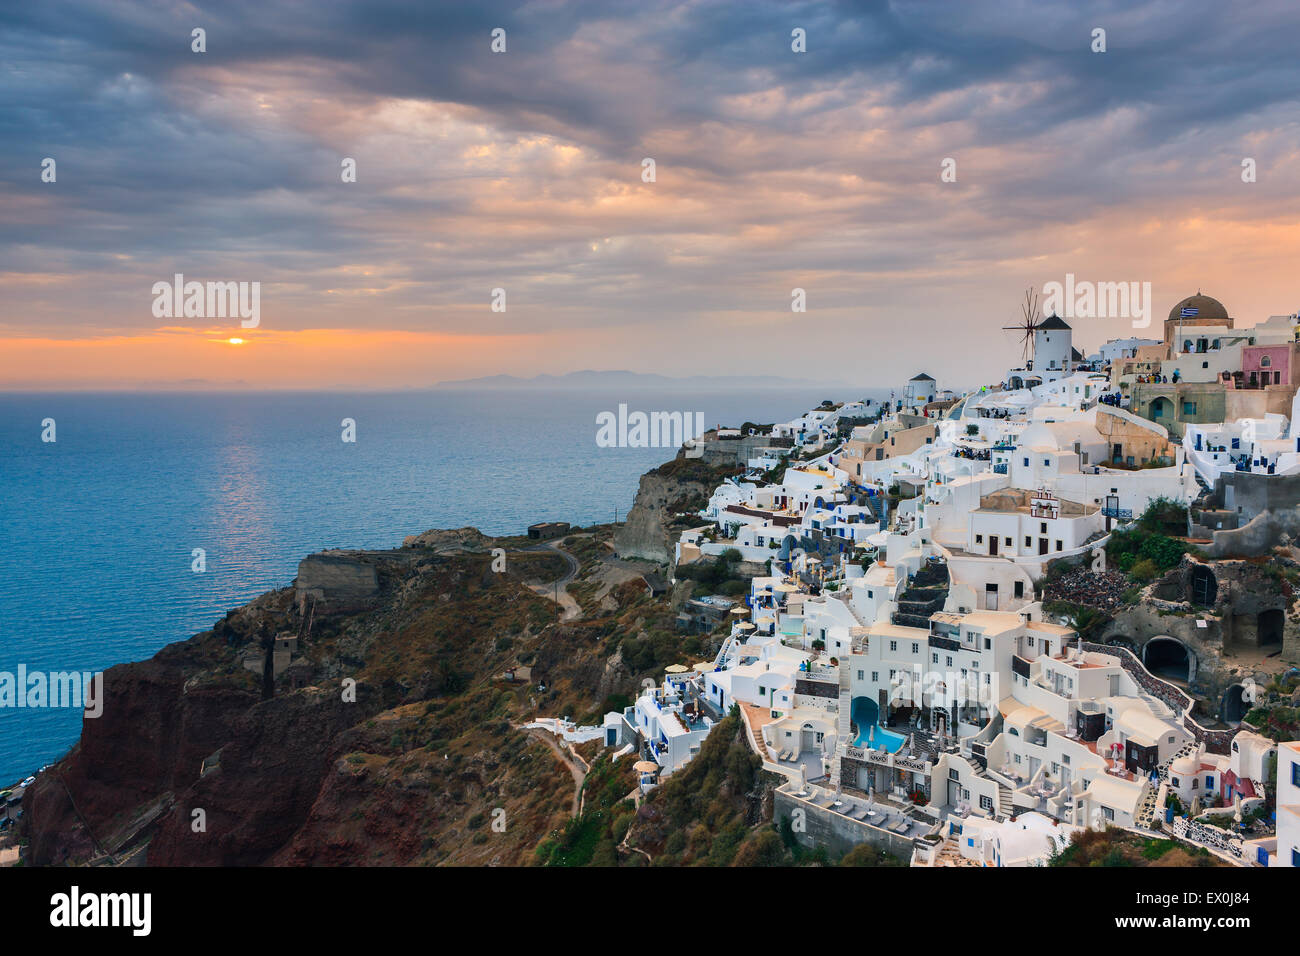 The town of Oia during sunset on Santorini, one of the Cyclades islands in Aegean Sea, Greece. Stock Photo